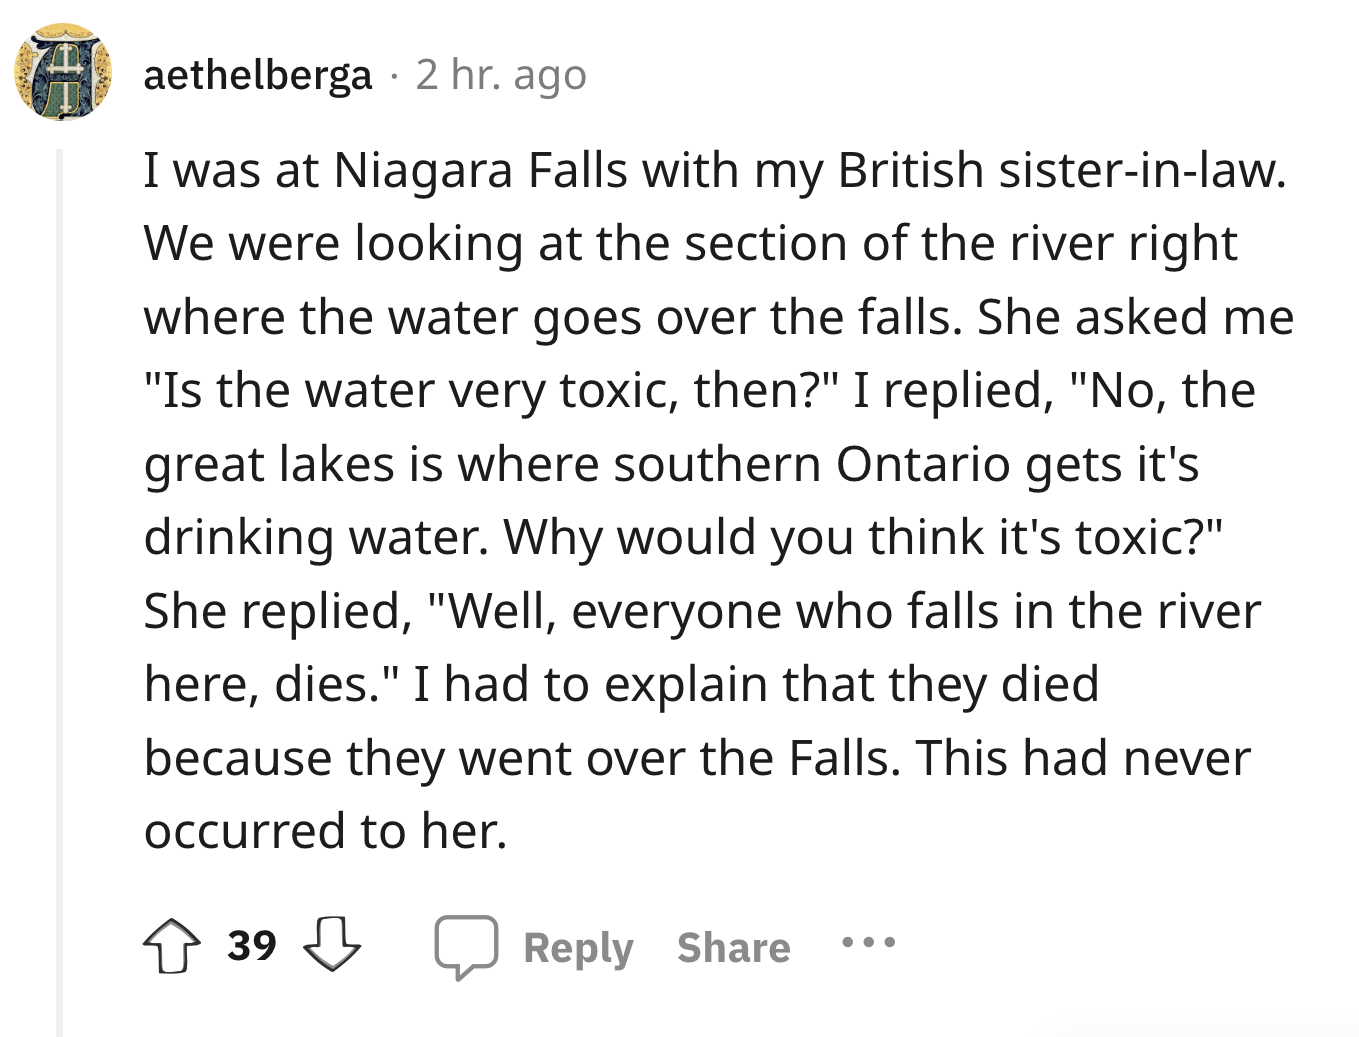 angle - aethelberga 2 hr. ago I was at Niagara Falls with my British sisterinlaw. We were looking at the section of the river right where the water goes over the falls. She asked me "Is the water very toxic, then?" I replied, "No, the great lakes is where